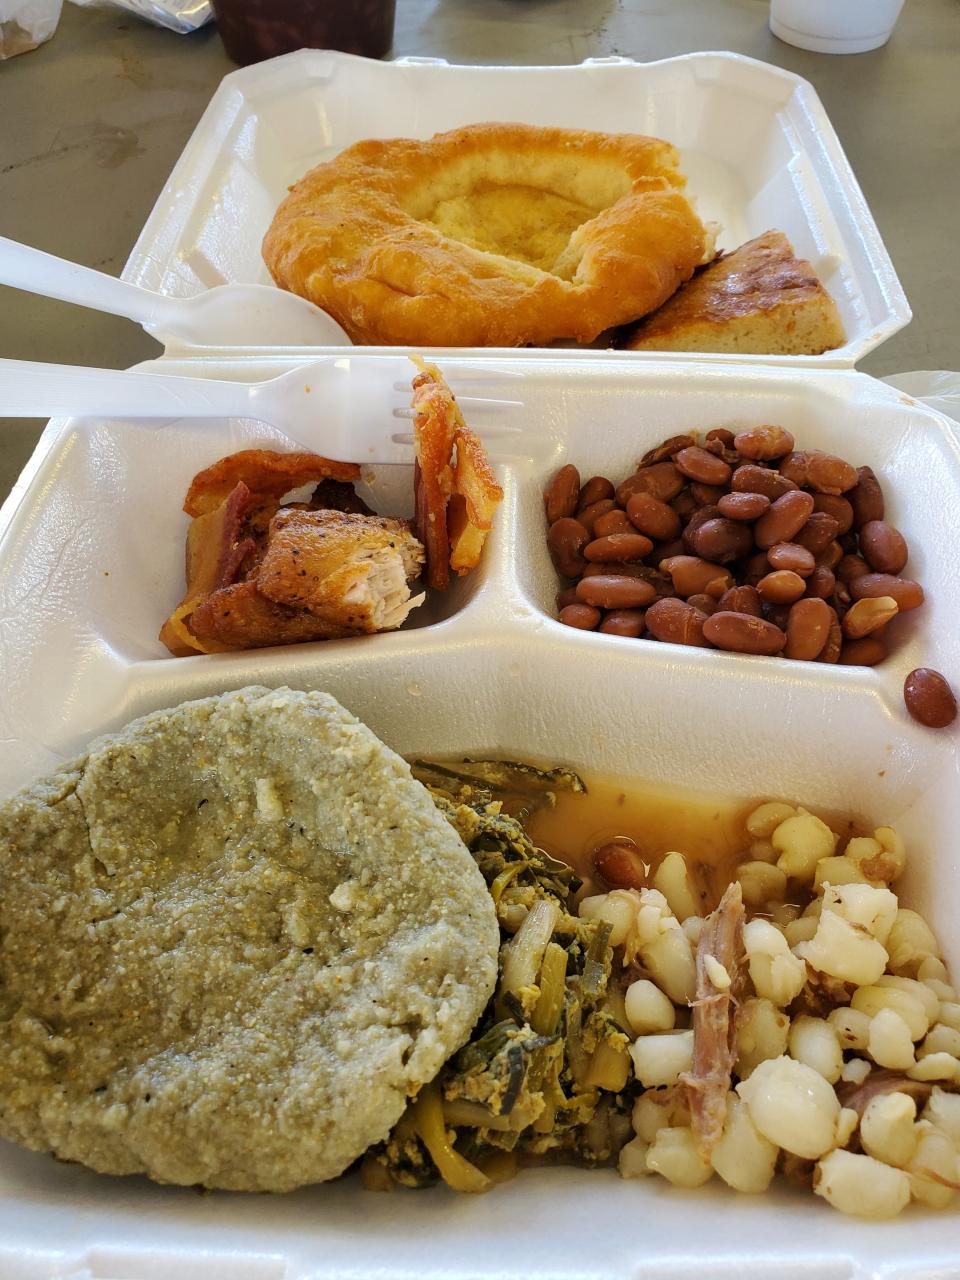 A traditional Muscogee (Creek) wild onion dinner is pictured, featuring blue corn bread, hominy, pork, beans, fry bread and skillet bread.